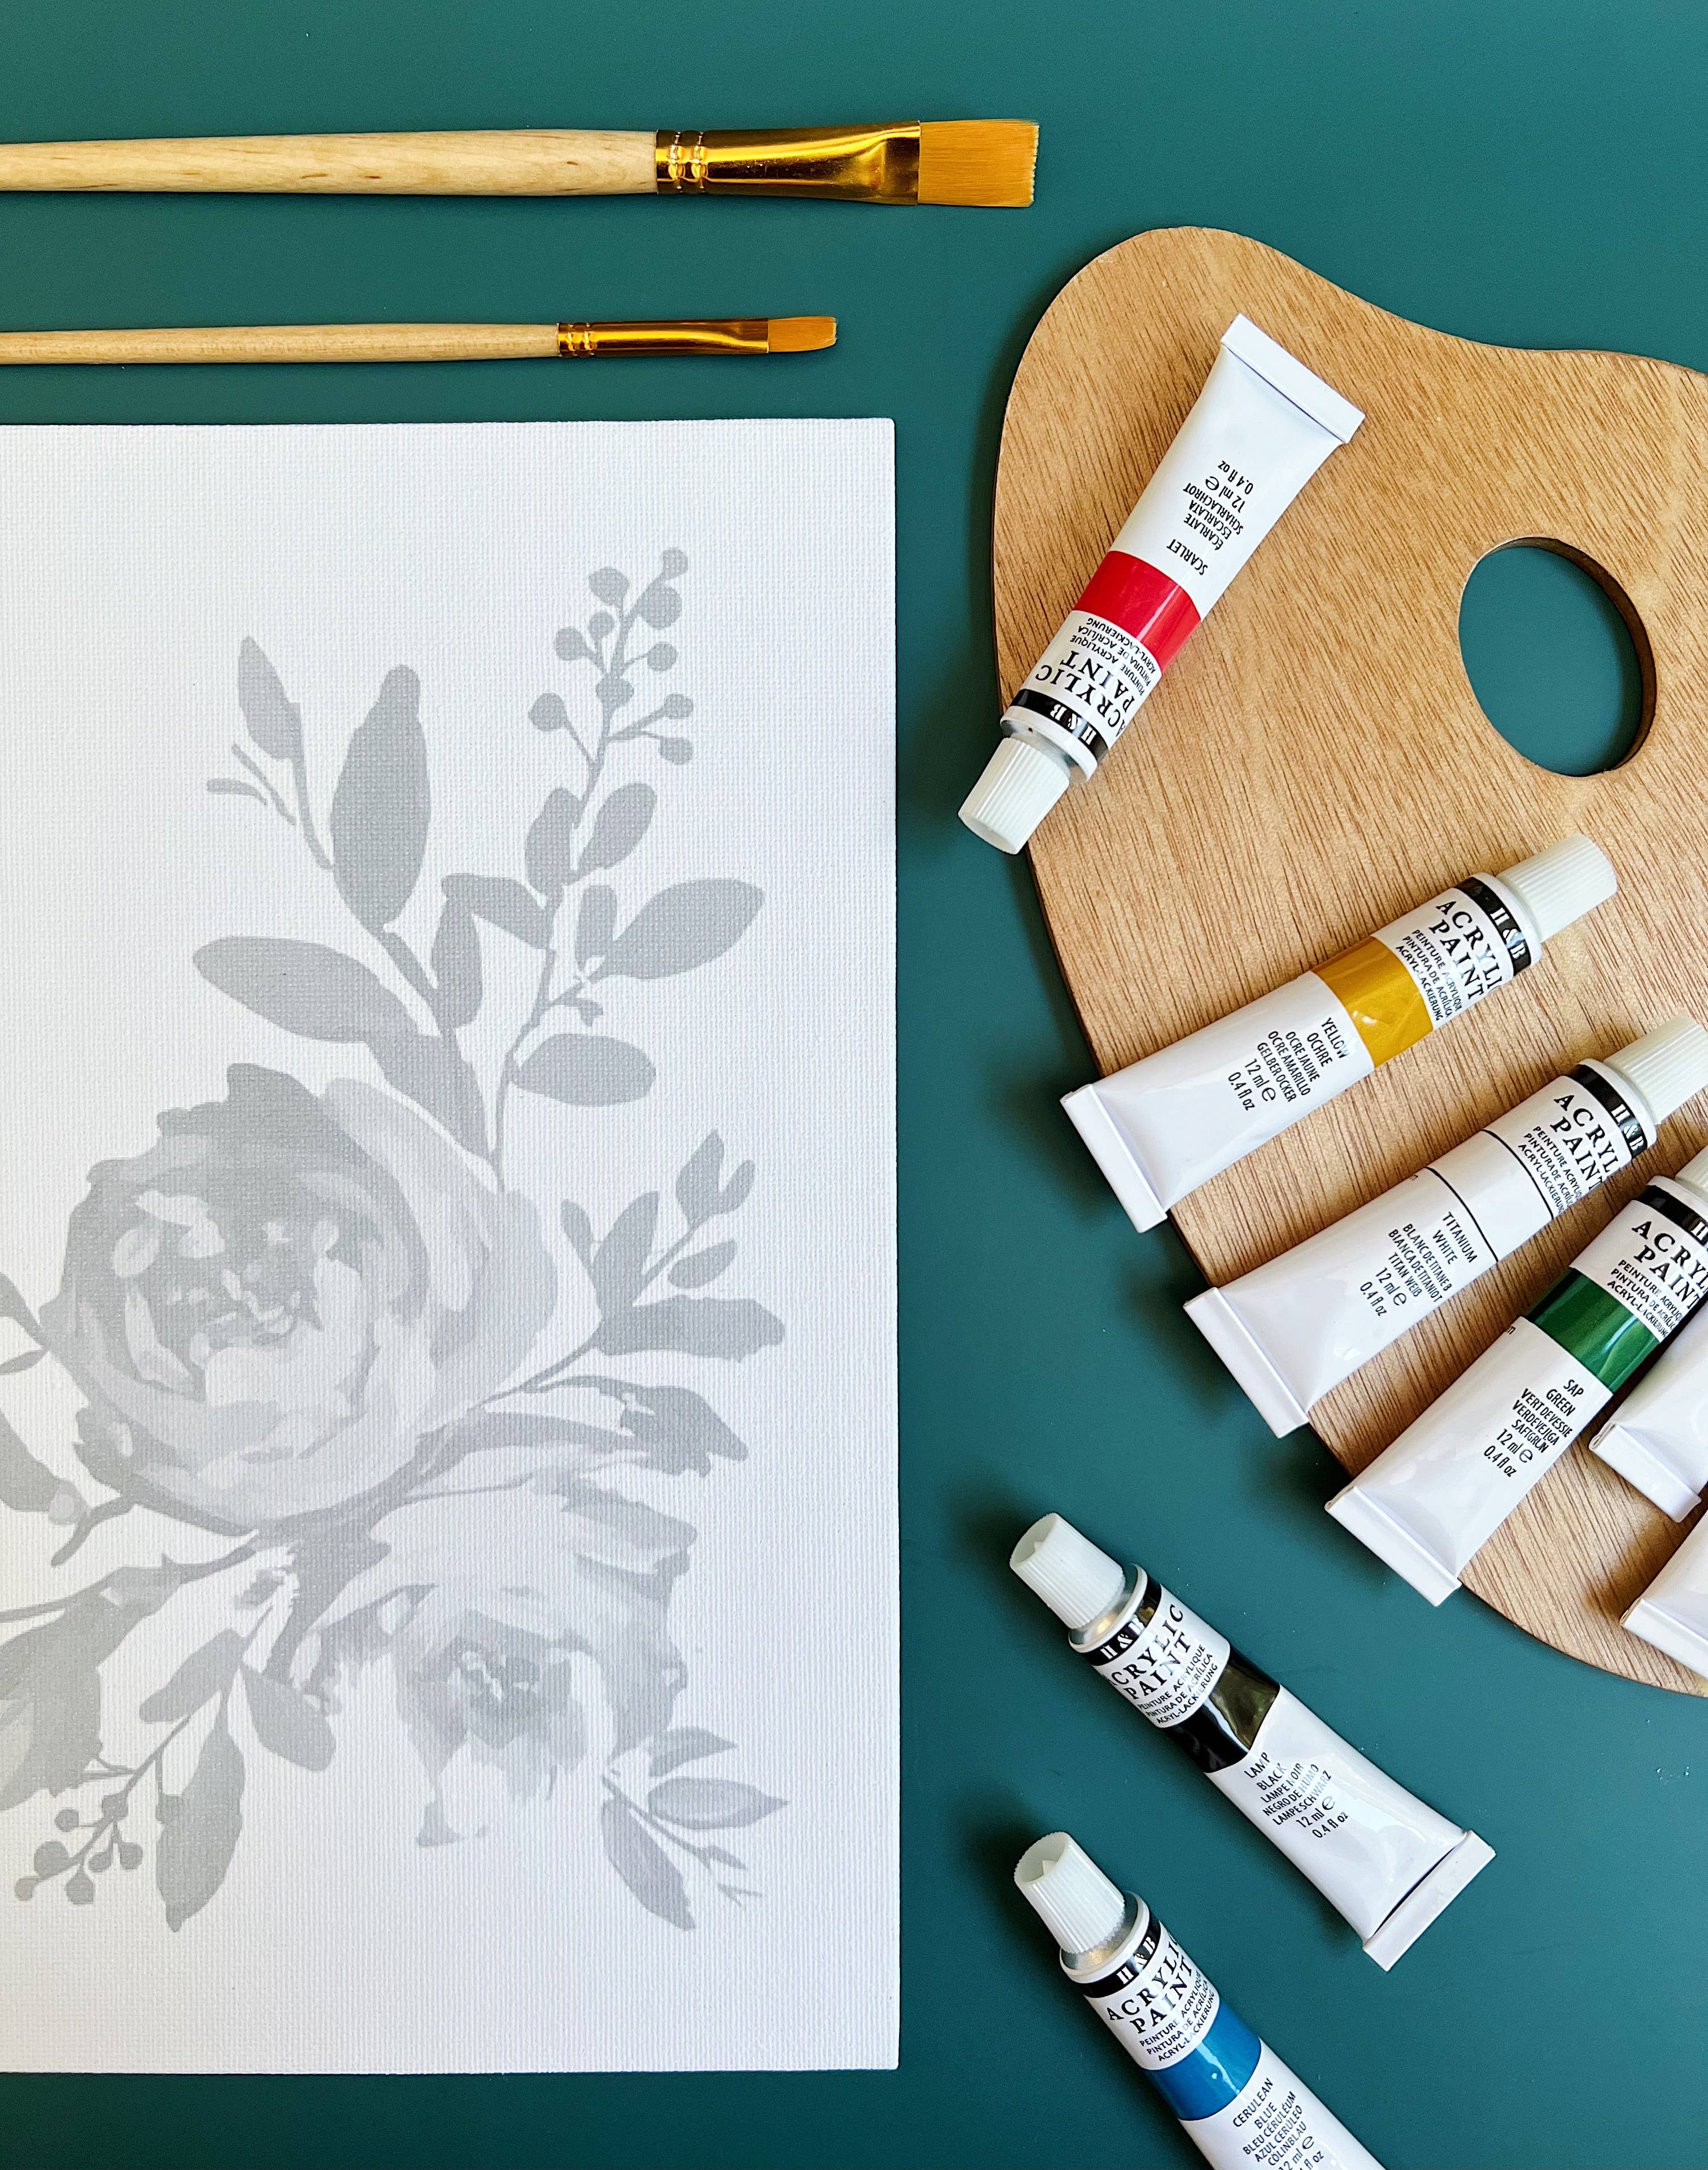 Abstract Roses Painting Kit